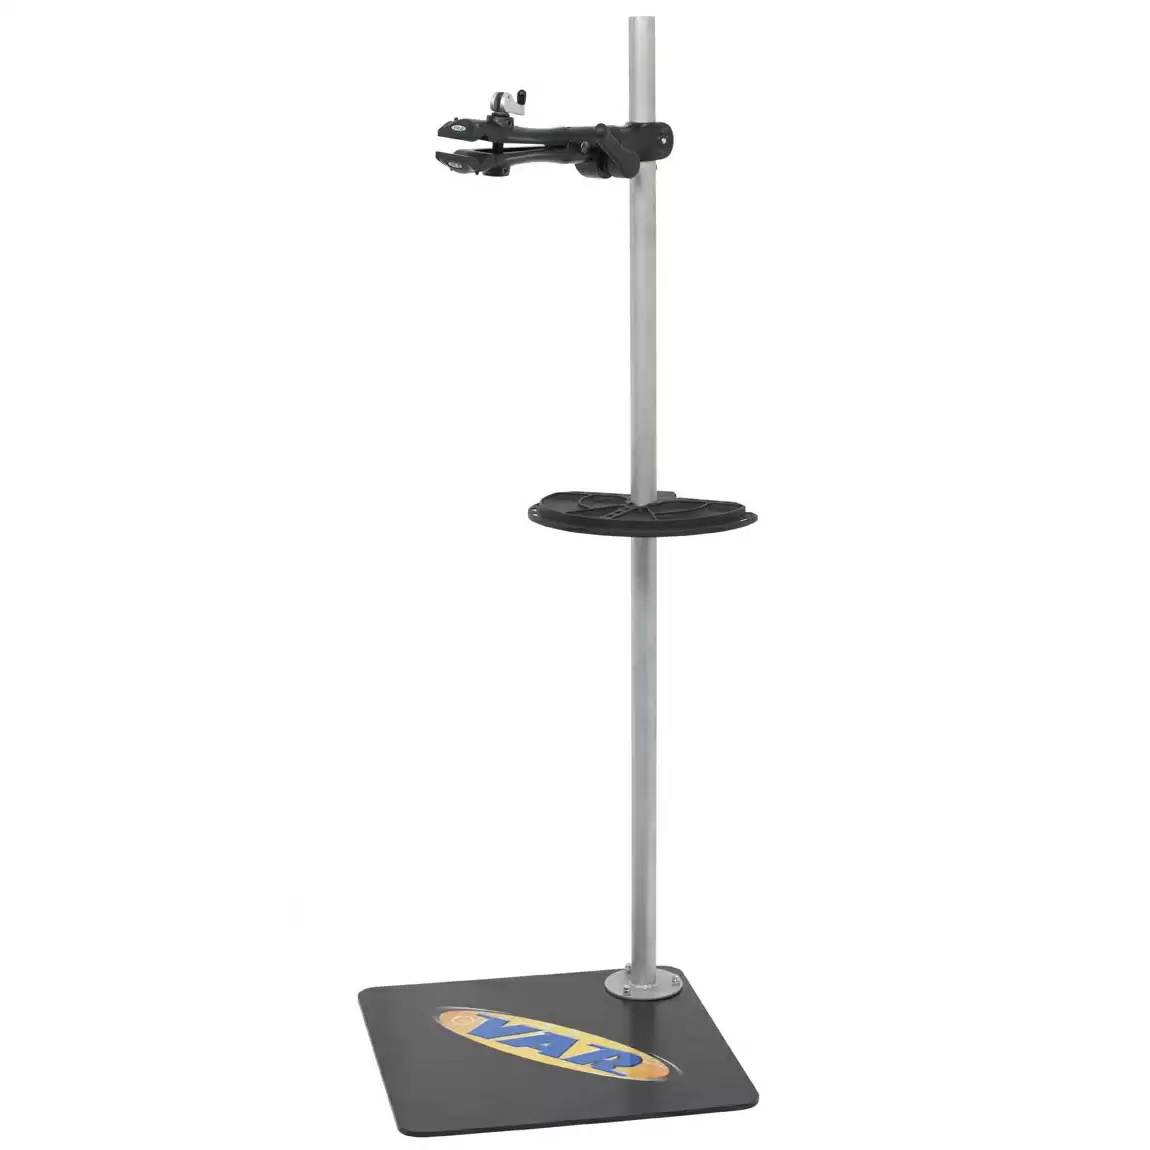 Professional repair stand single clamps - image